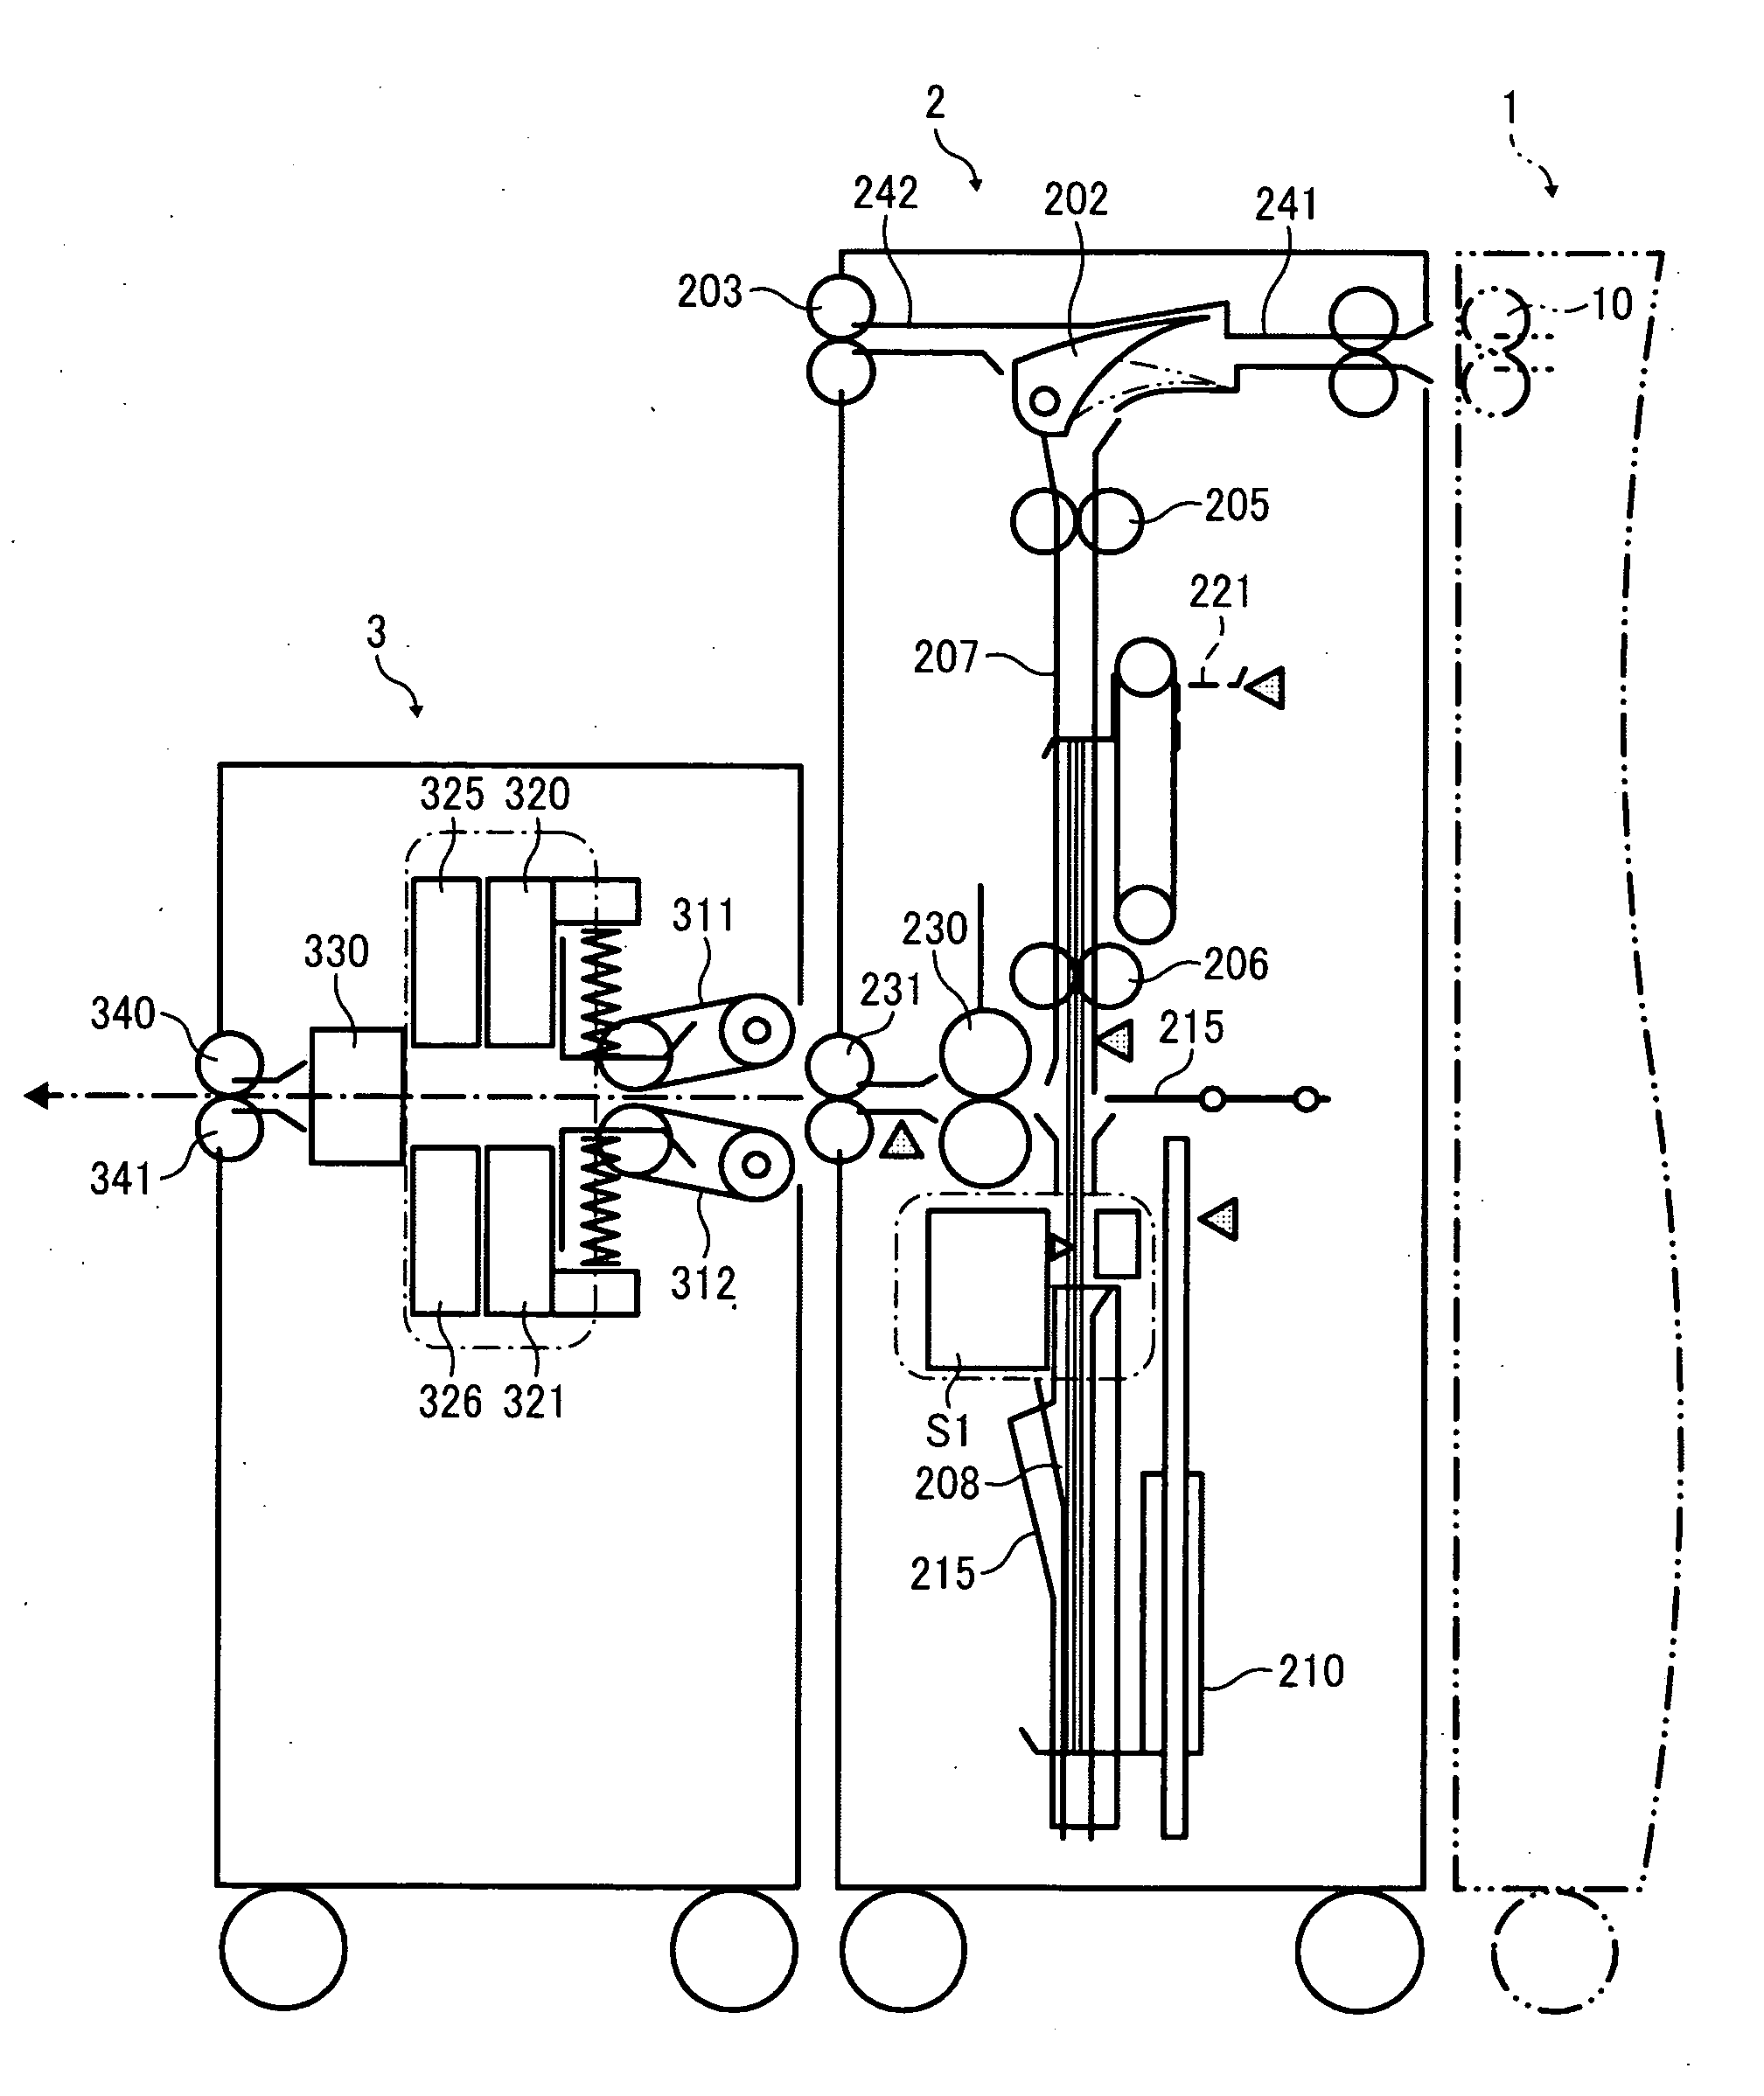 Spine formation device, post-processing apparatus, and bookbinding system